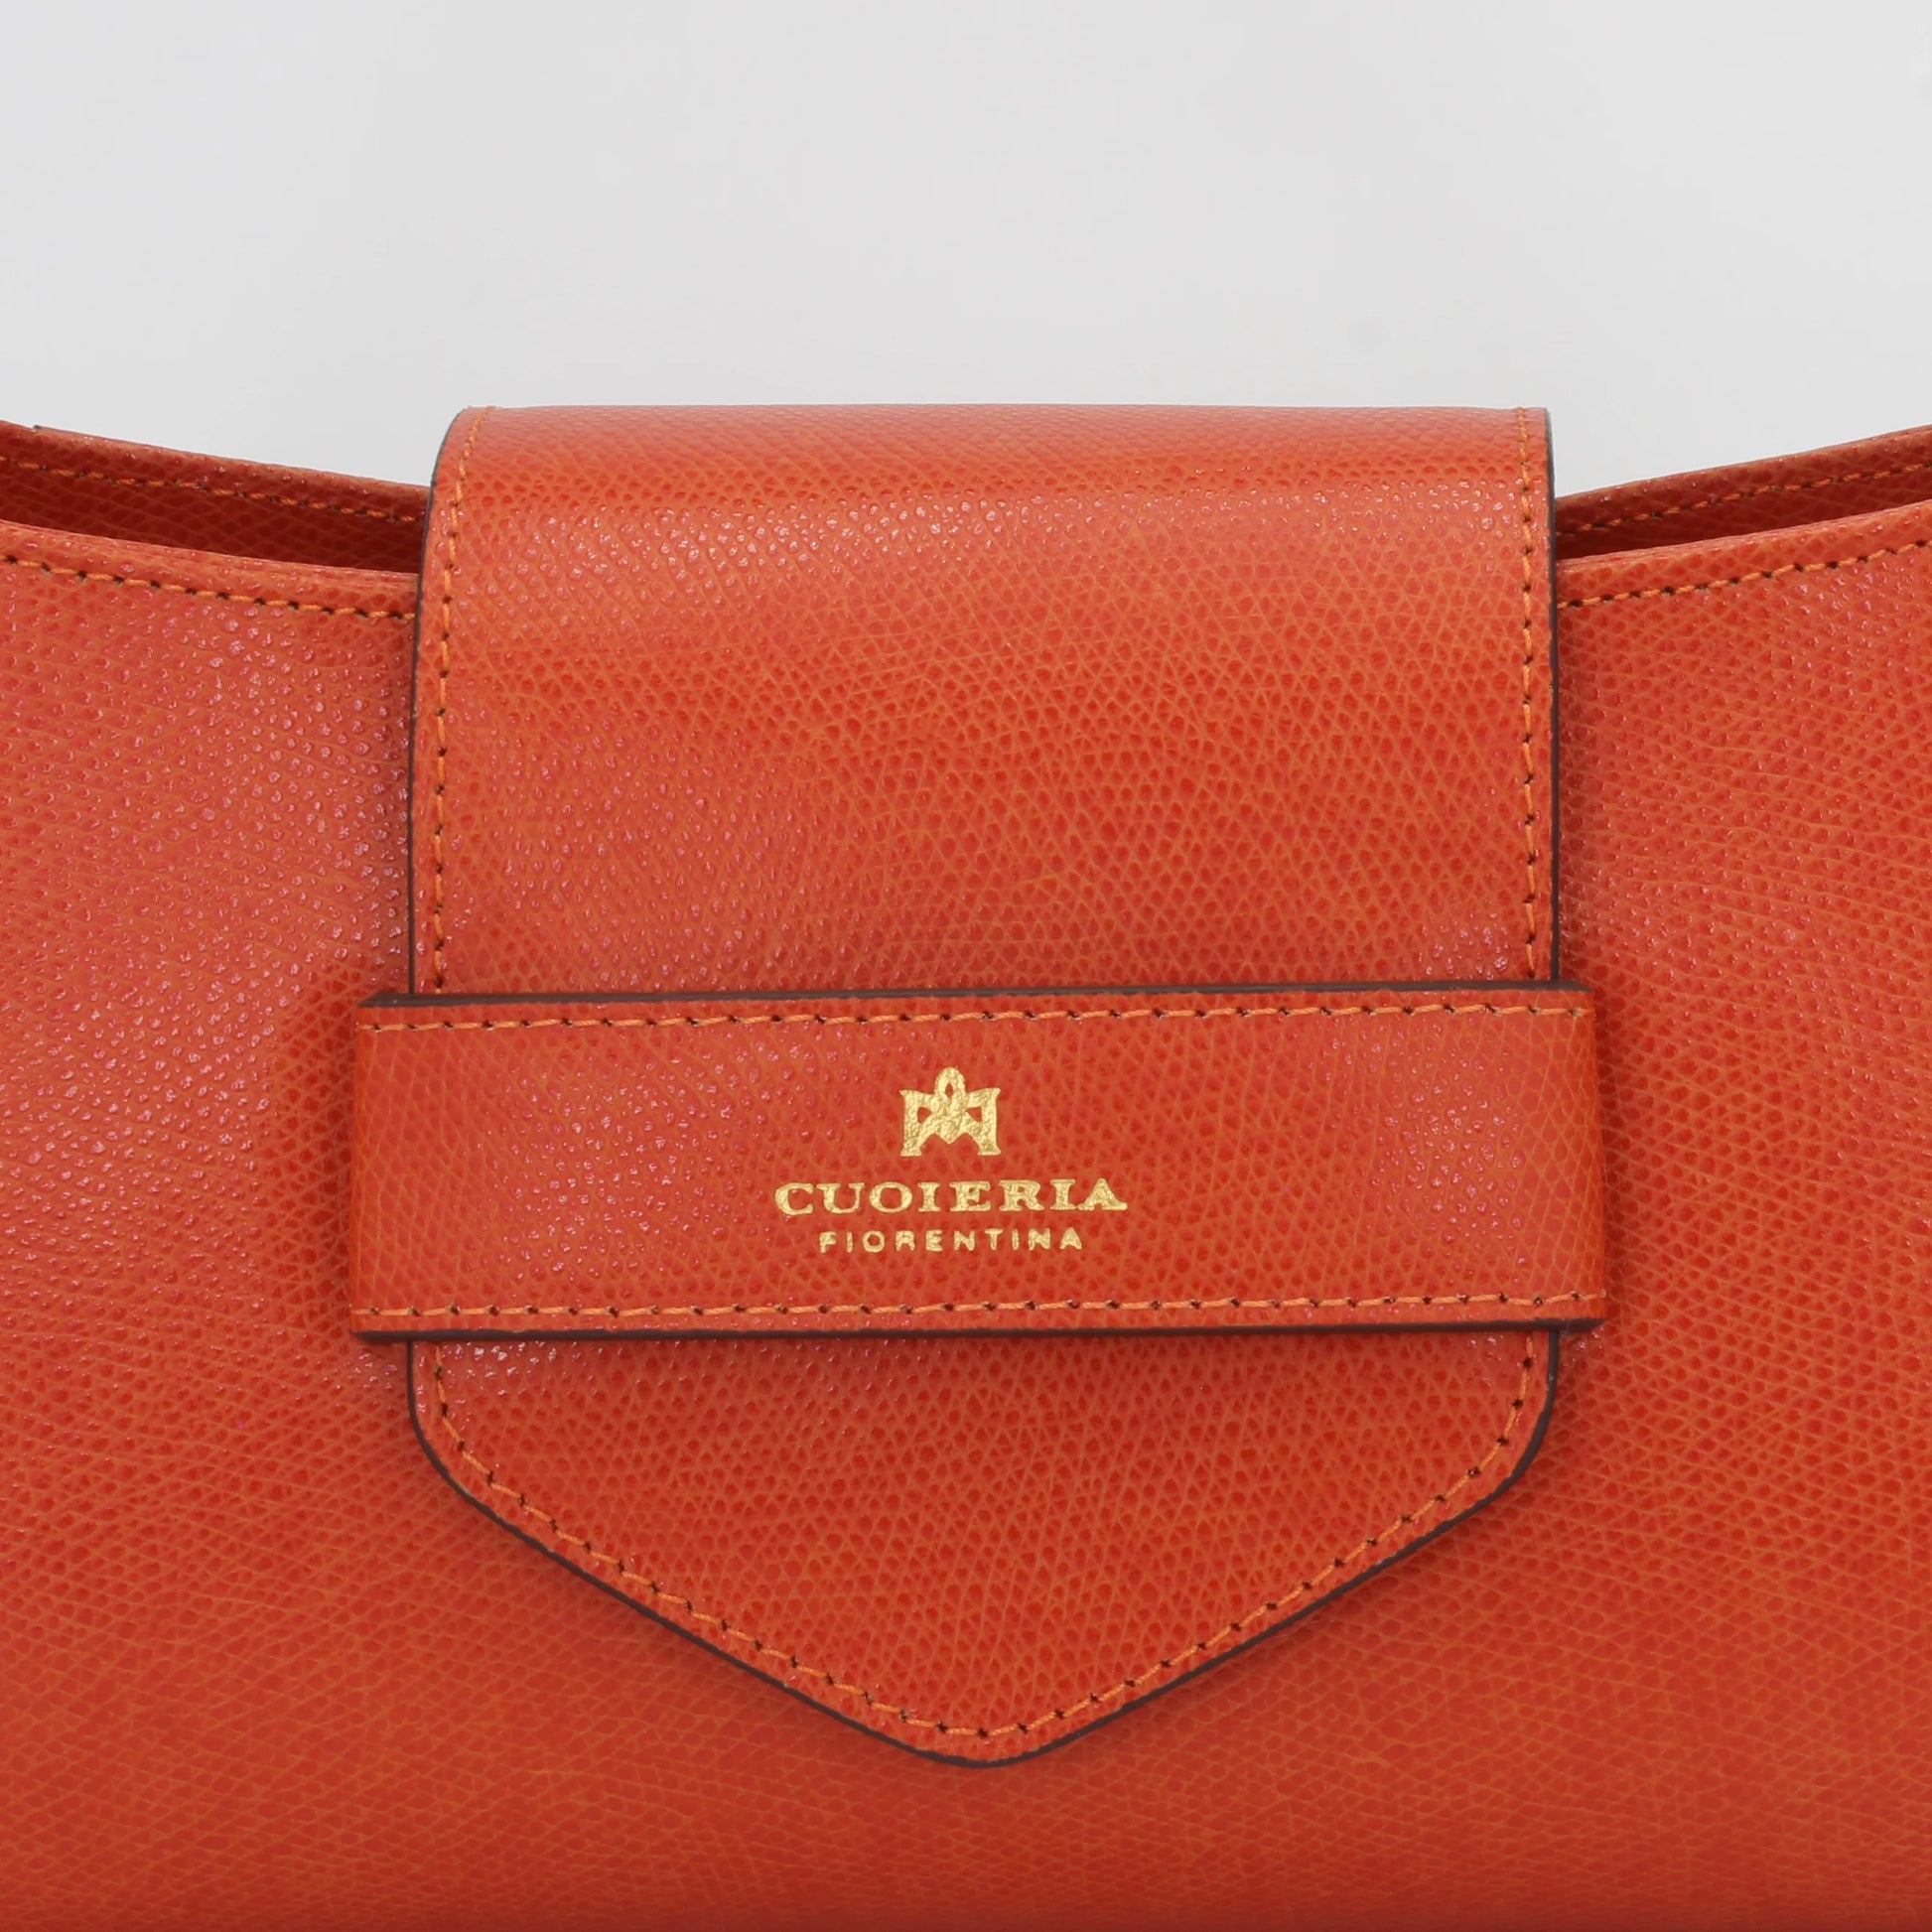 Shop Womens Italian-made Leather small shoulder handbag in arancio bruciato (B000005932420) or browse our range of hand-made Italian handbags for women in-store at Aliverti Cape Town, or shop online.   We deliver in South Africa & offer multiple payment plans as well as accept multiple safe & secure payment methods.